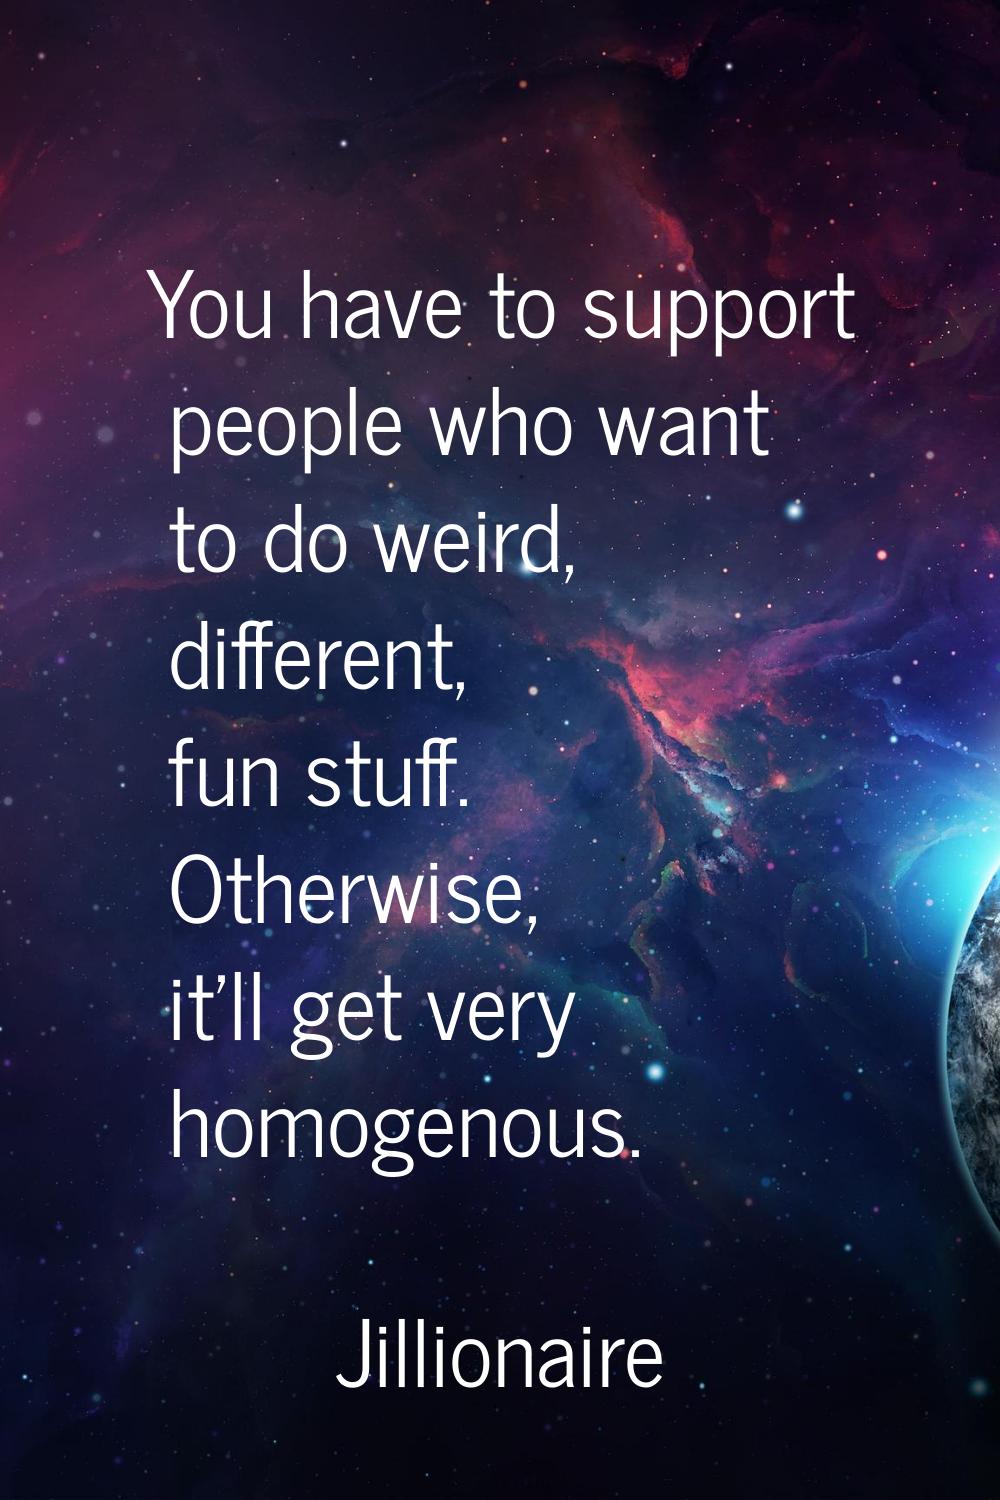 You have to support people who want to do weird, different, fun stuff. Otherwise, it'll get very ho